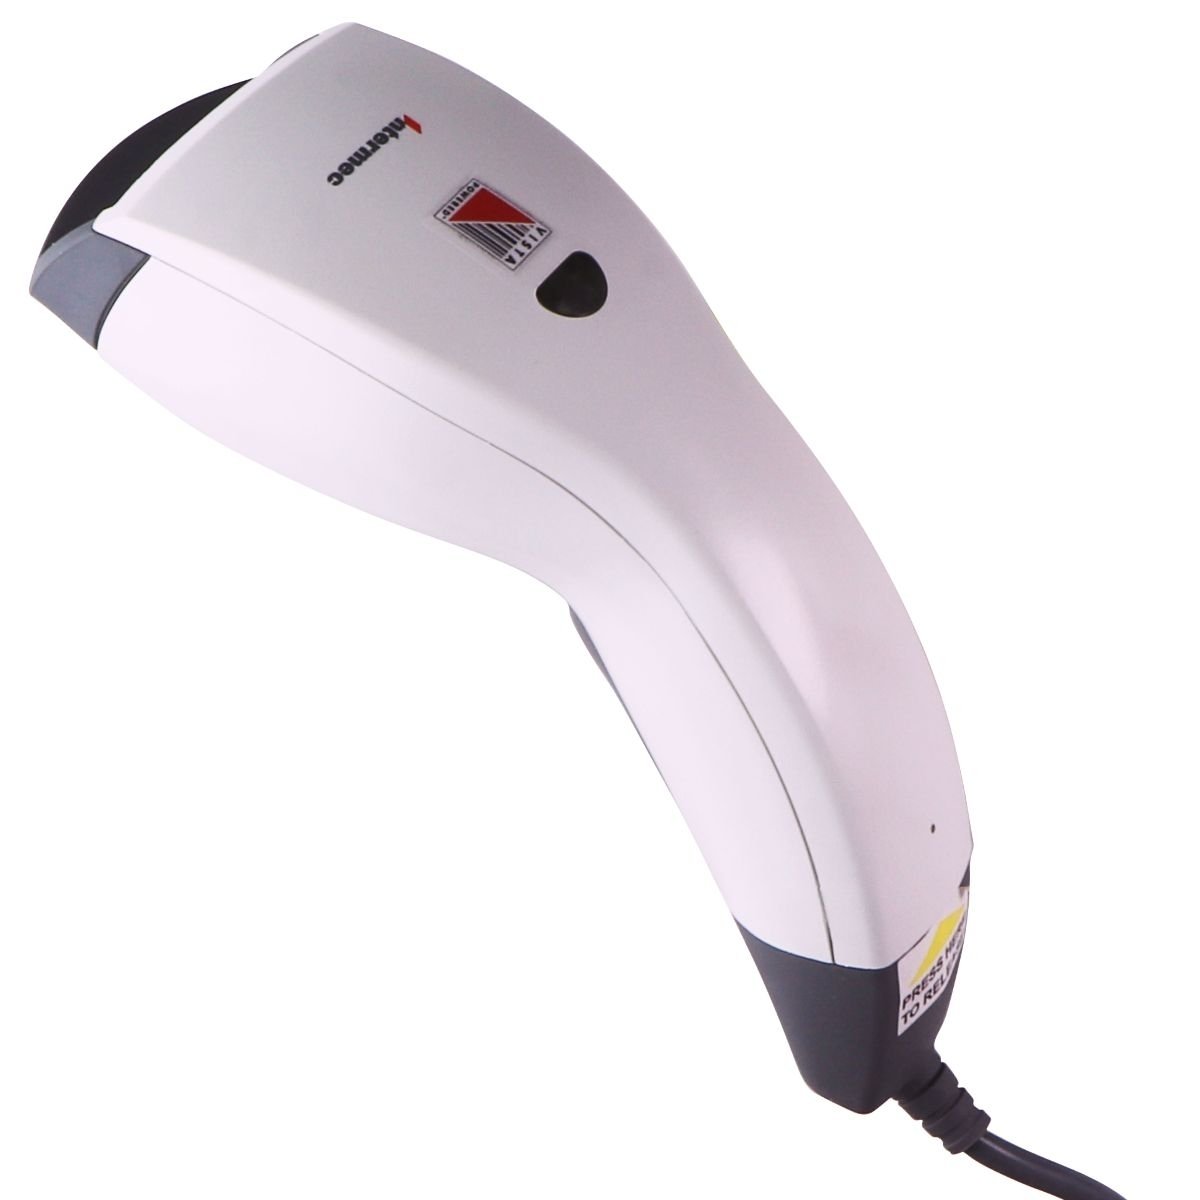 Intermec ScanPlus 1800 VT Barcode Scanner With USB Cable - White